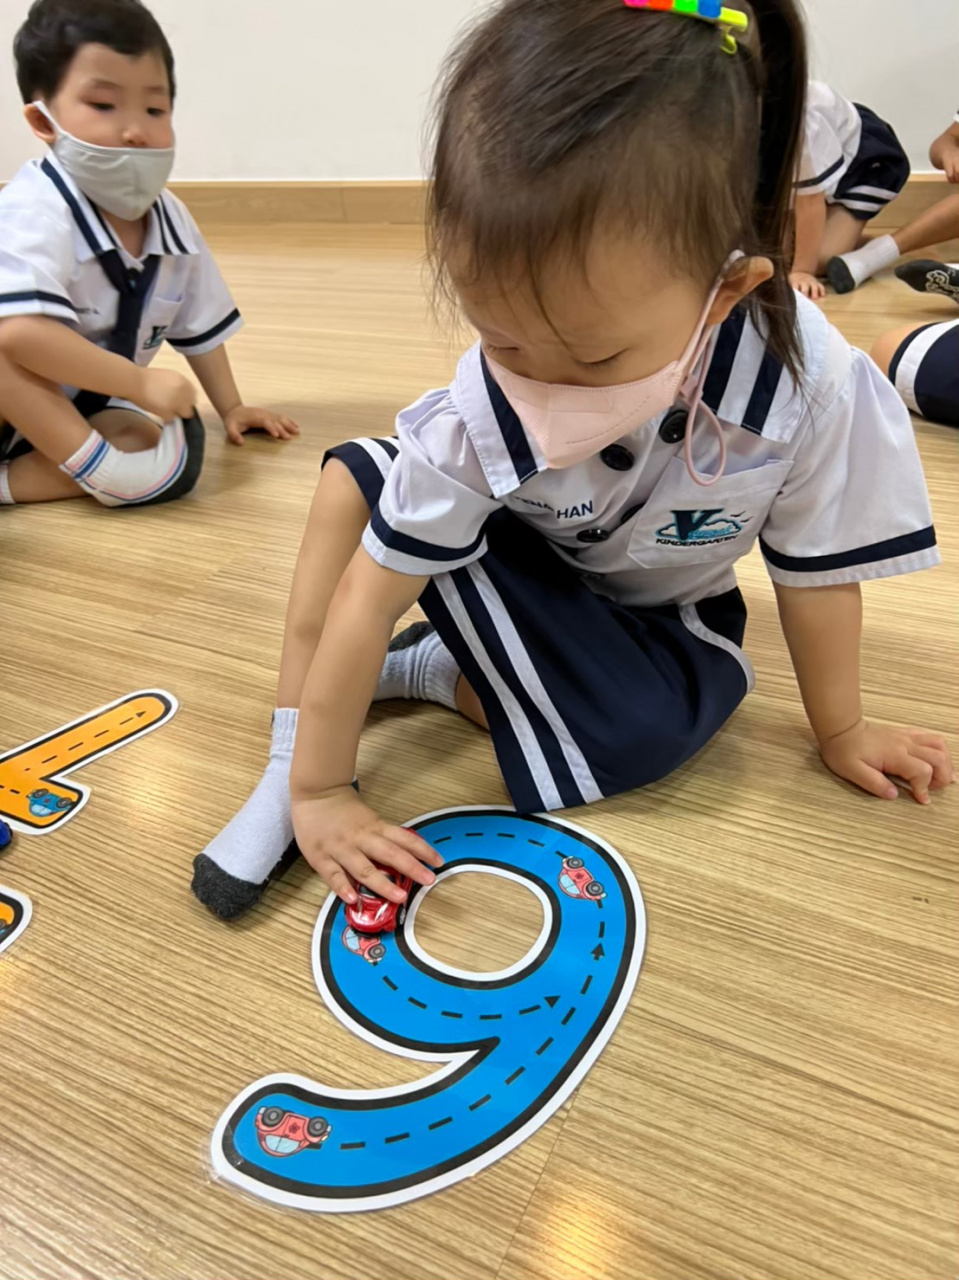 Identifying numbers by using the road numbers math training card